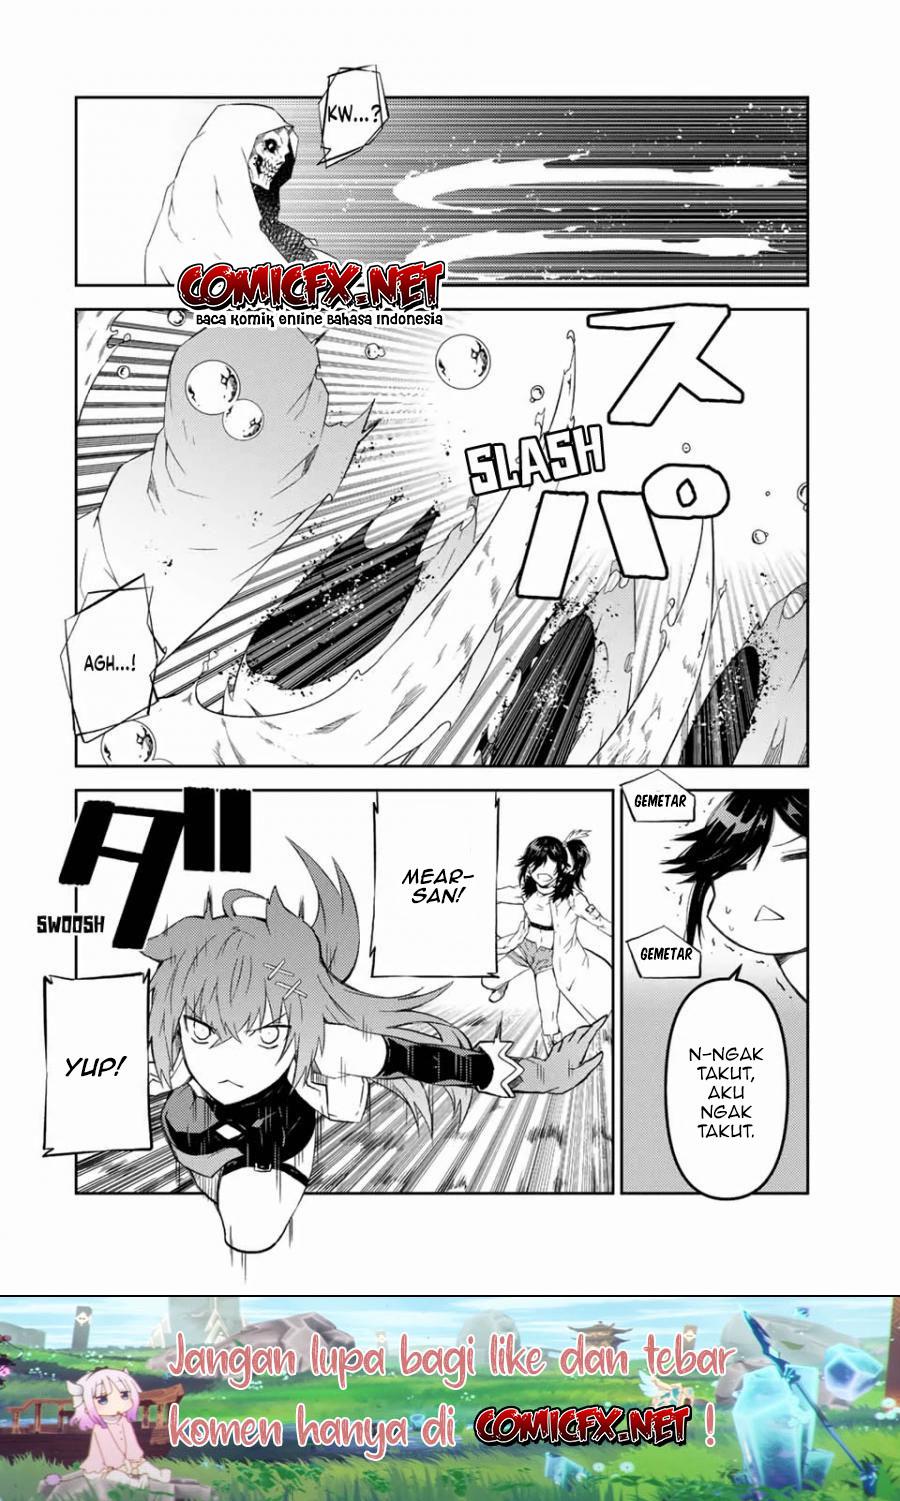 The Weakest Occupation “Blacksmith,” but It’s Actually the Strongest Chapter 35 Bahasa Indonesia